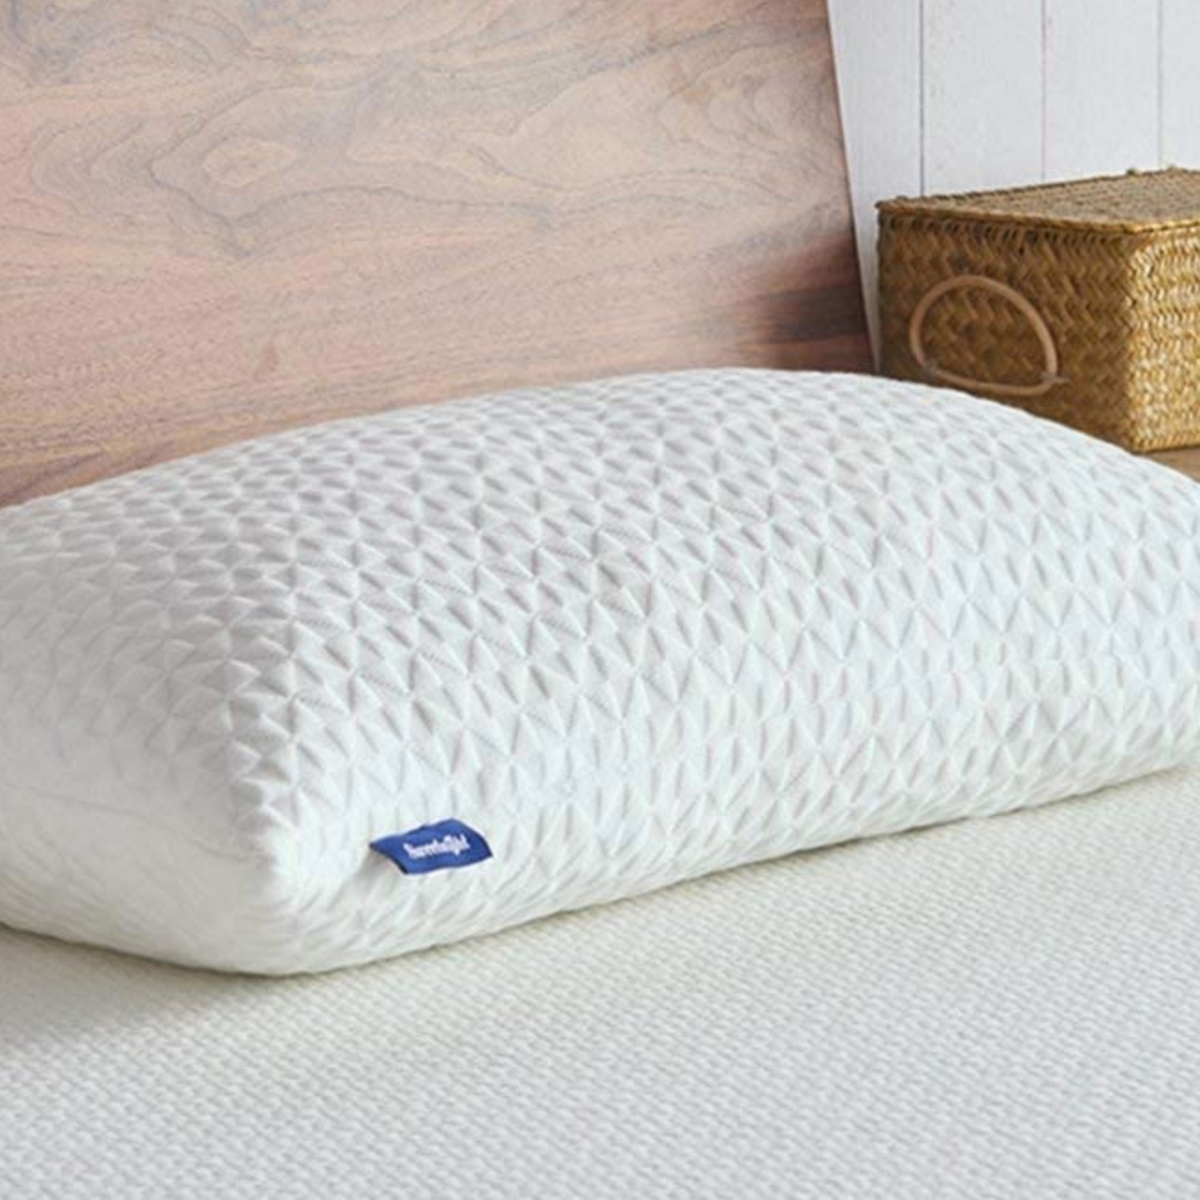 8 Best Cooling Pillows 2020 | The 